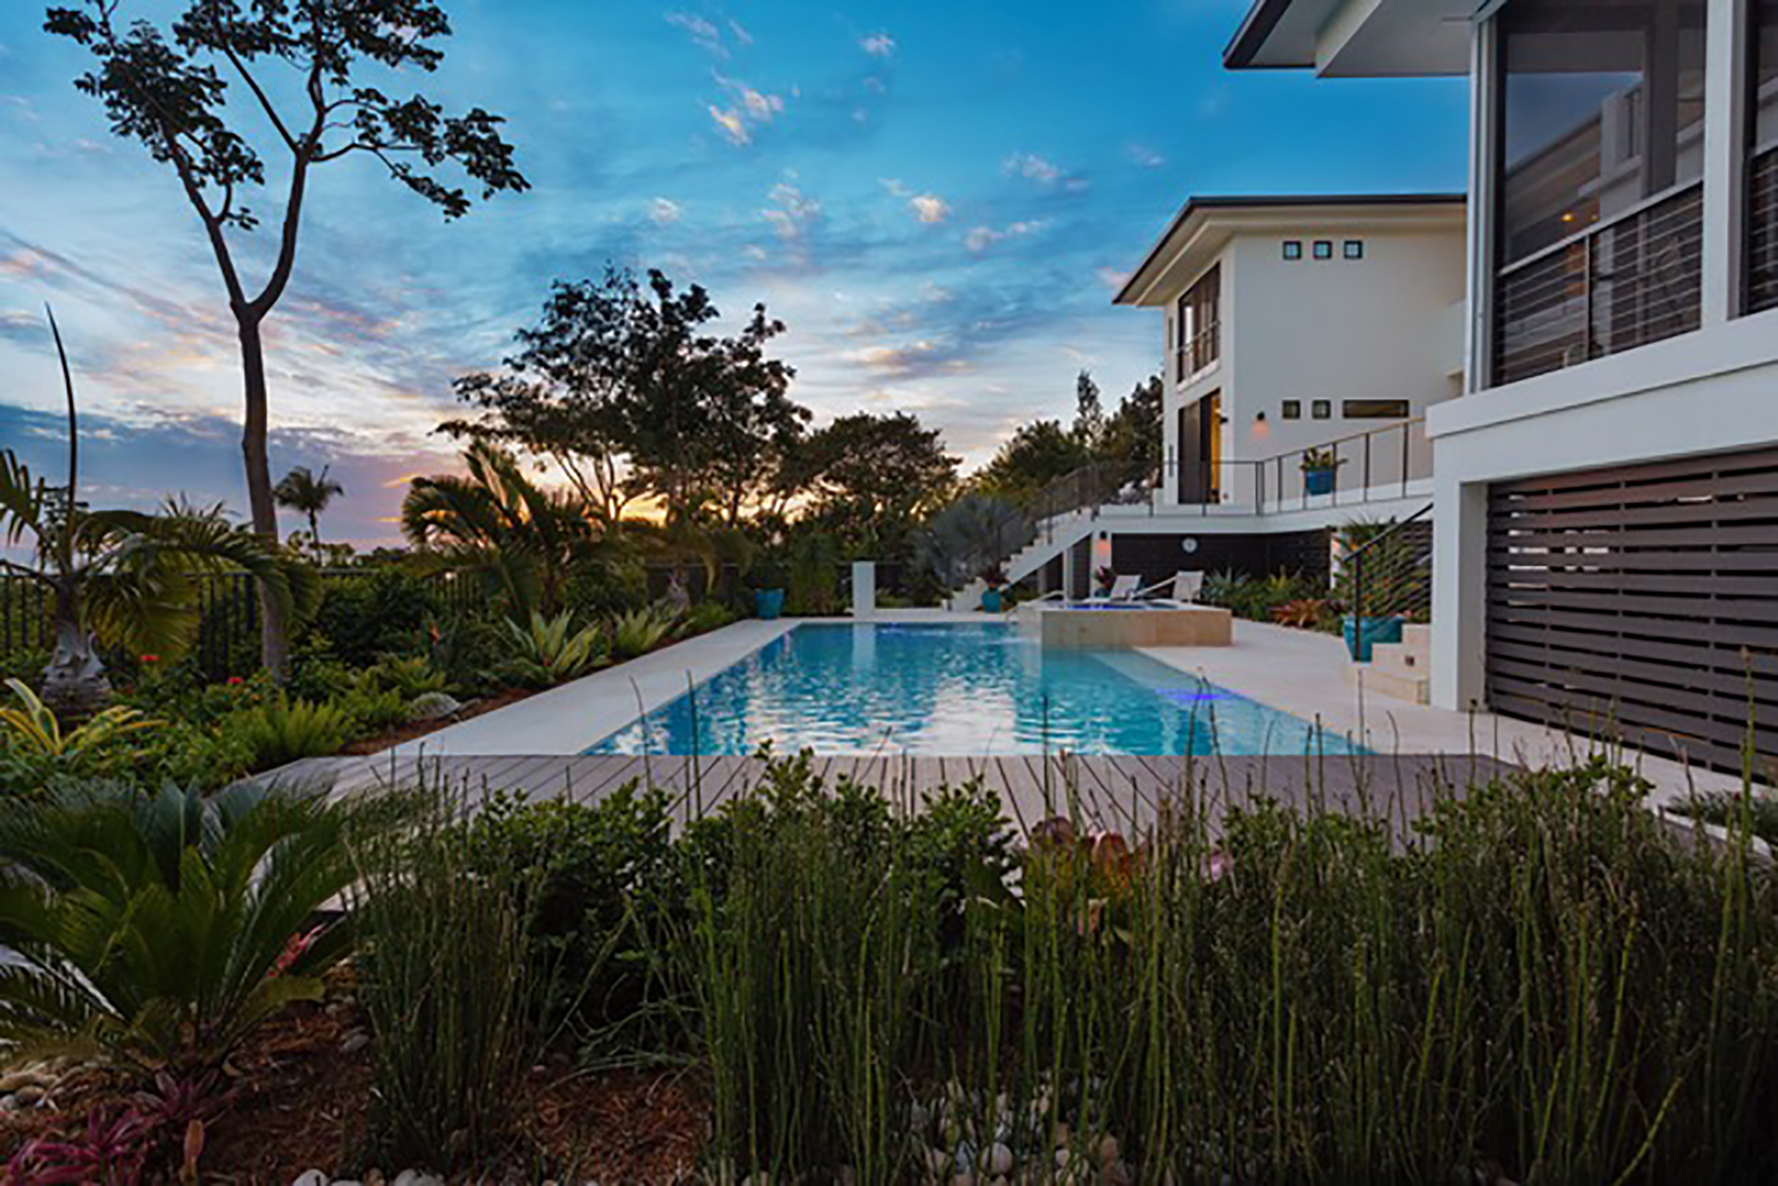 Joyce Owens' design of this home on Sanibel Island maximizes the benefits of the natural environment while offering protection from sun and rain. Courtesy Joshua Colt Fisher